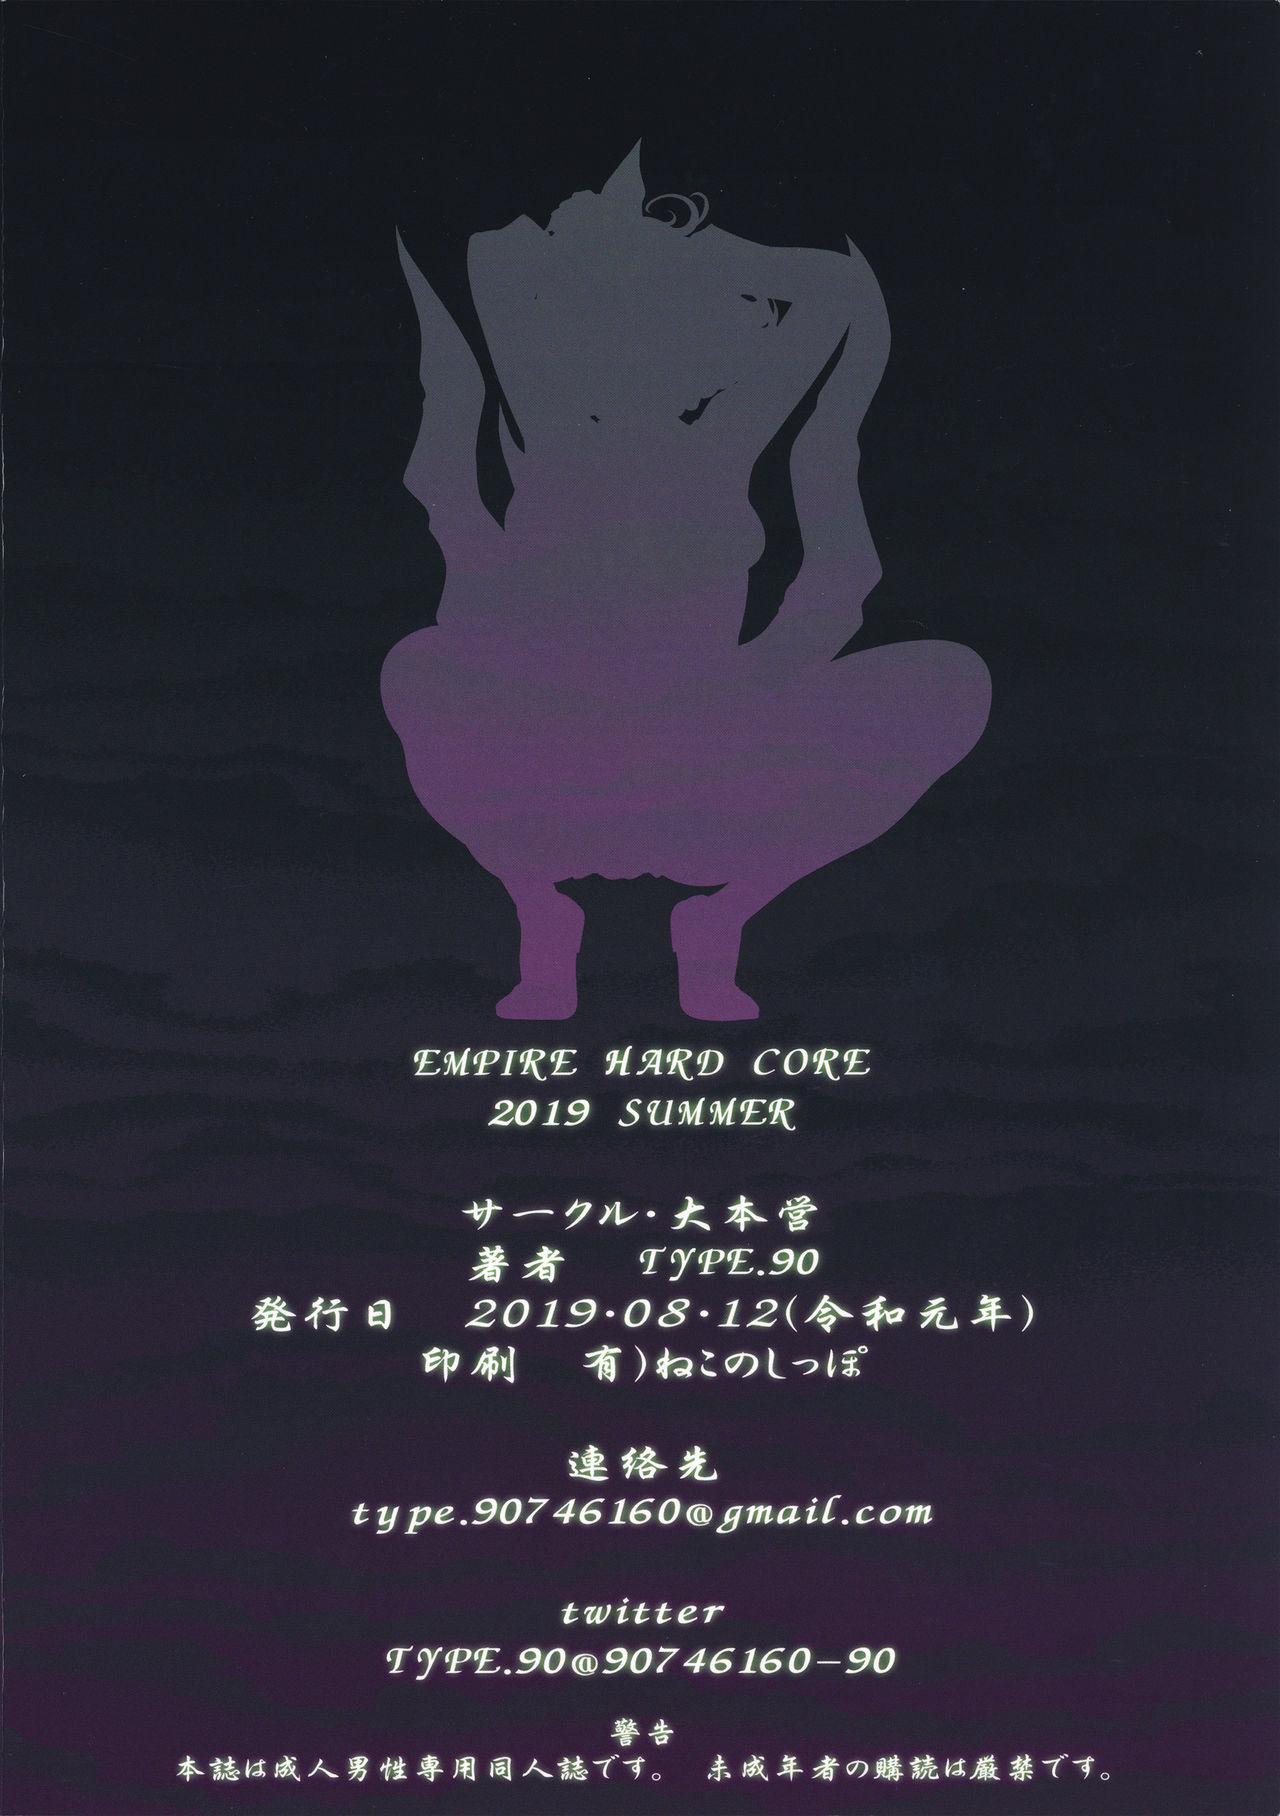 Bisex EMPIRE HARD CORE 2019 SUMMER - One punch man Oral Sex - Page 26